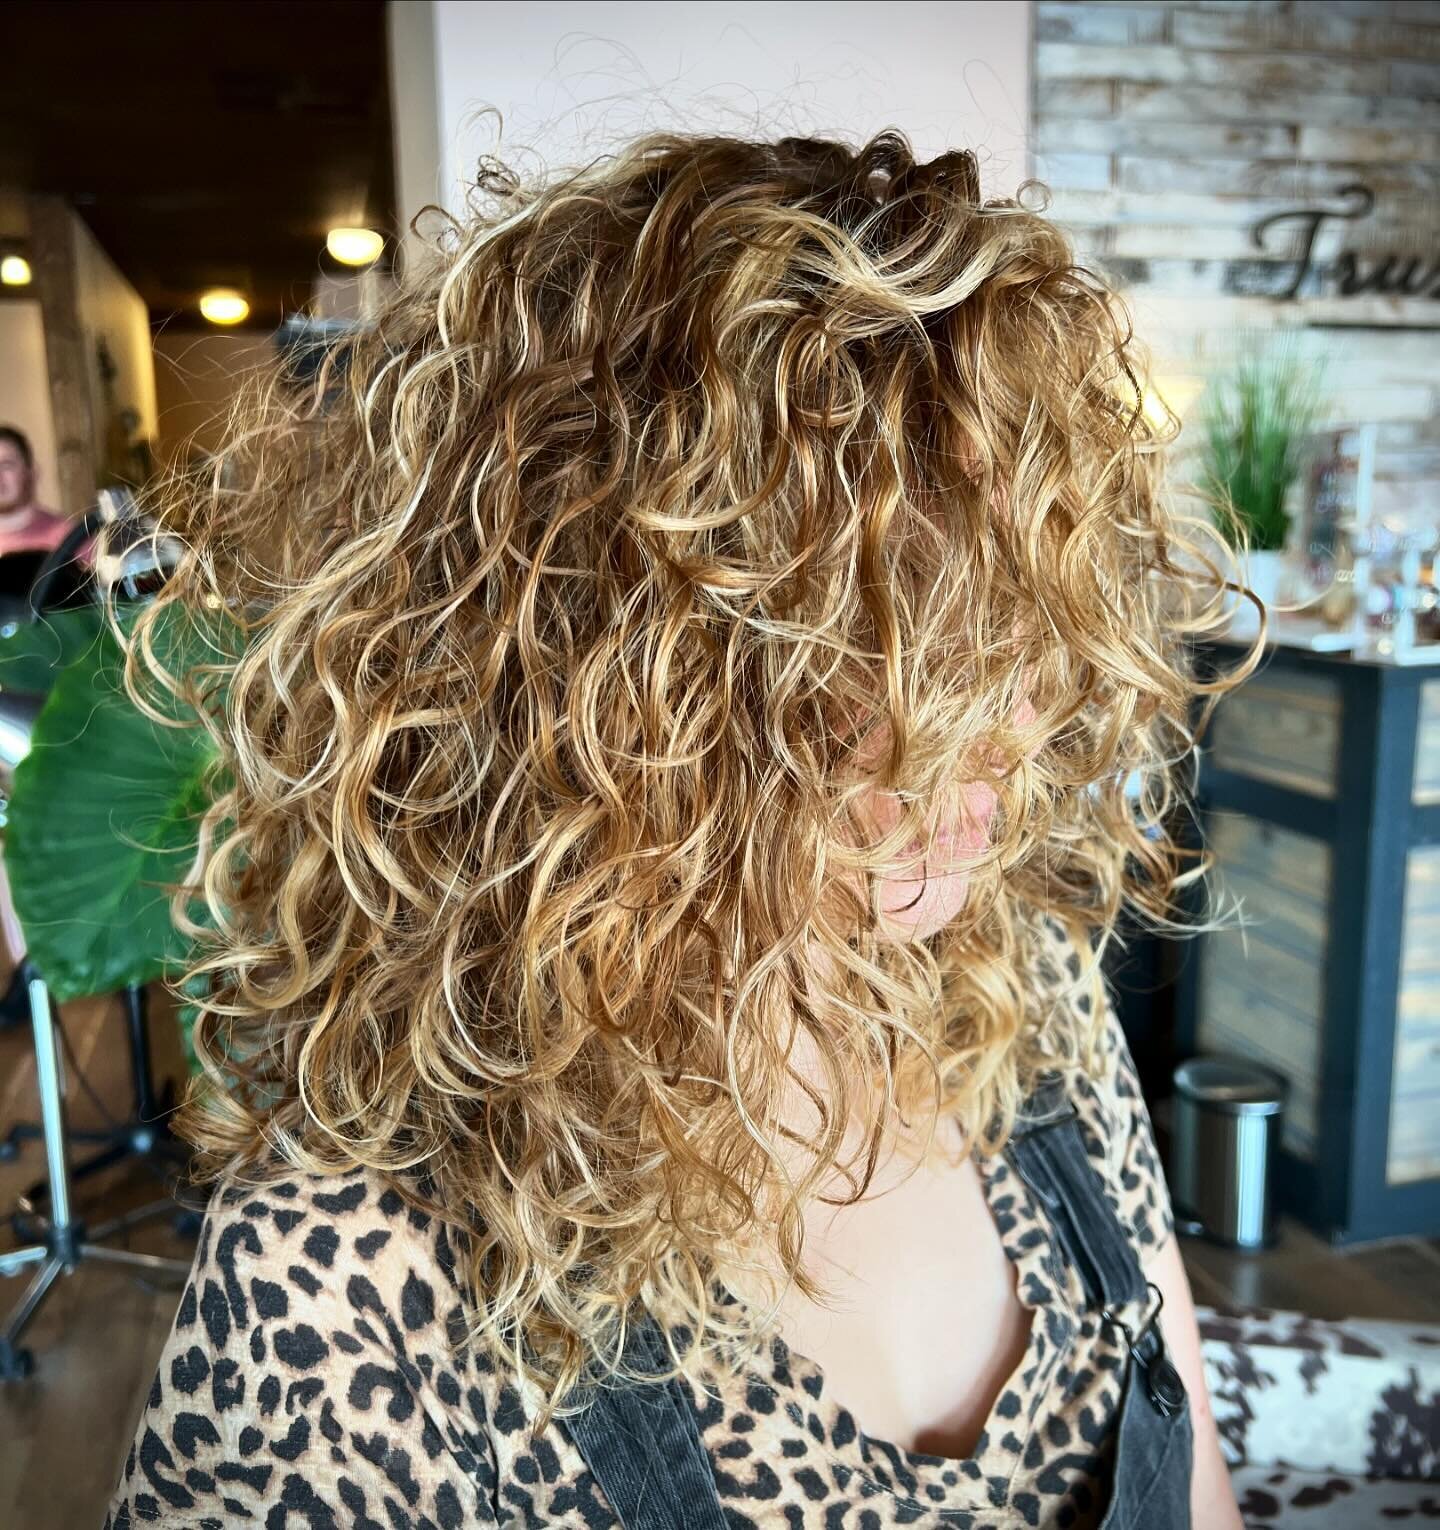 Curly Girls!!!💫💫💫
Did you know that we have a Cut and Color 
Specialist Exclusively for Curls?!!!!

@lived.in_light in a 2x Certified @rezoacademy 
And is here for you!!!
Let&rsquo;s get you started on your journey to loving your hair!!!